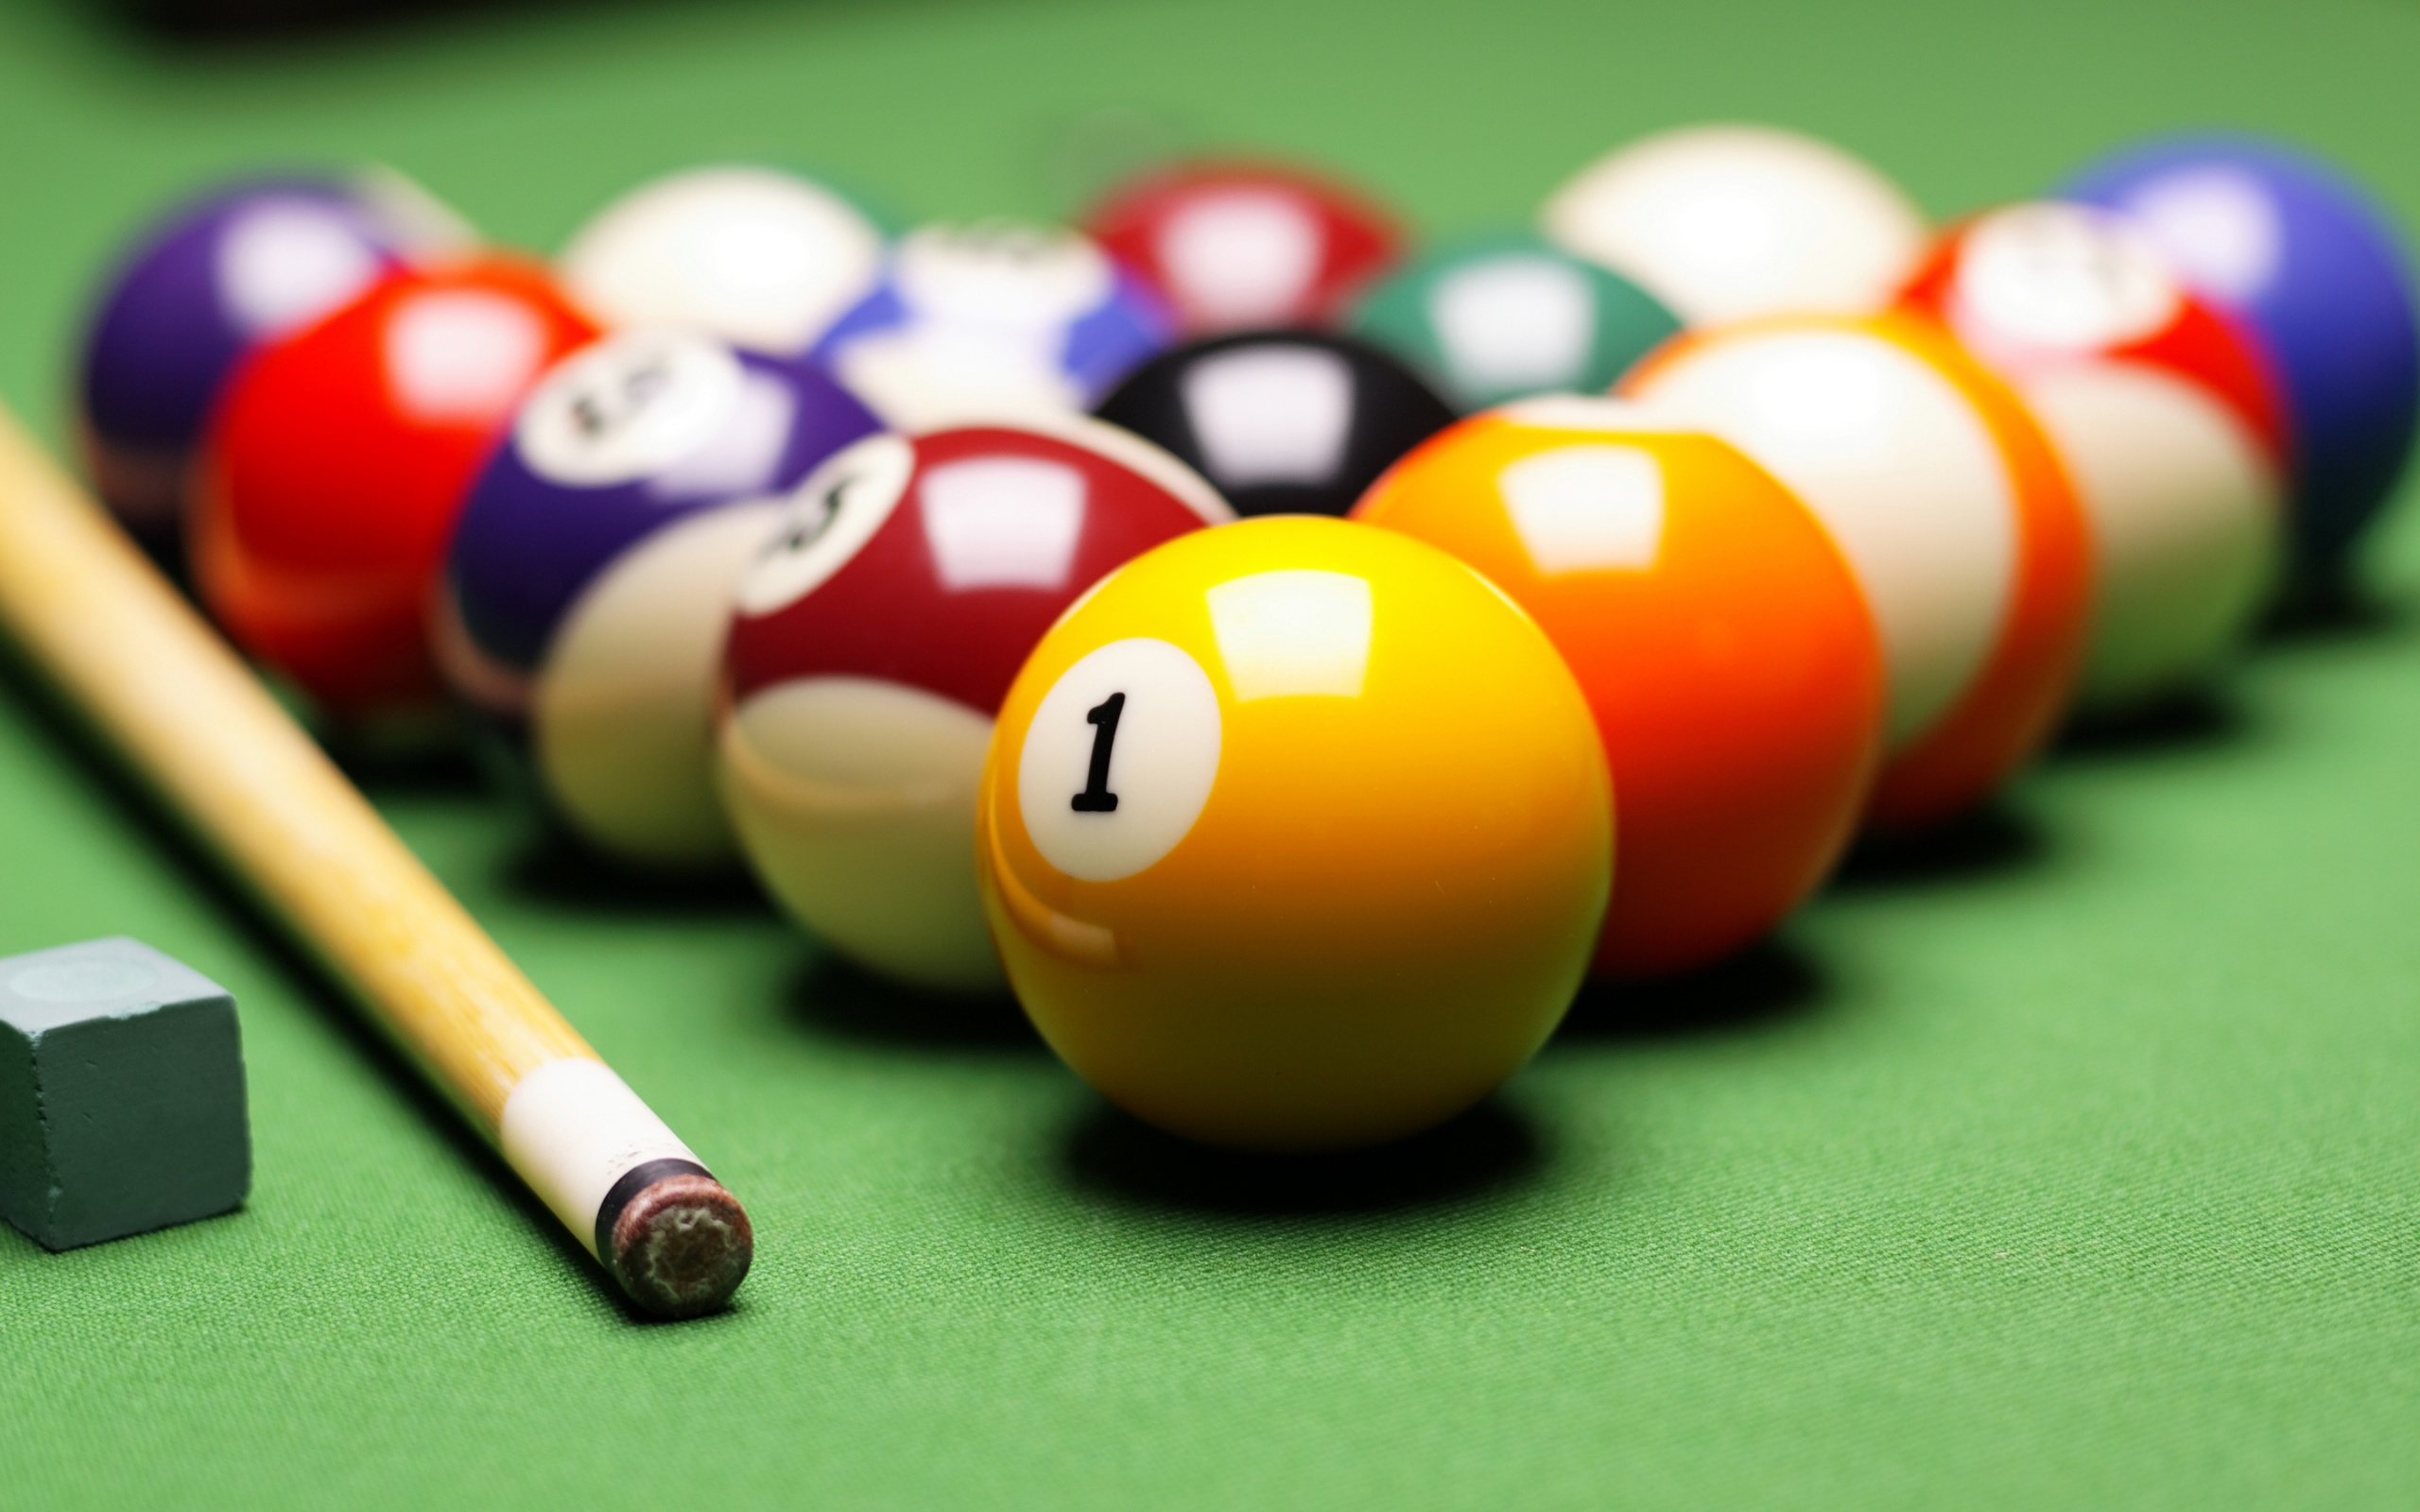 Pool (Cue Sports): Cue stick, object balls and cue chalk - equipment for an eight-ball game with a cue. 2560x1600 HD Wallpaper.